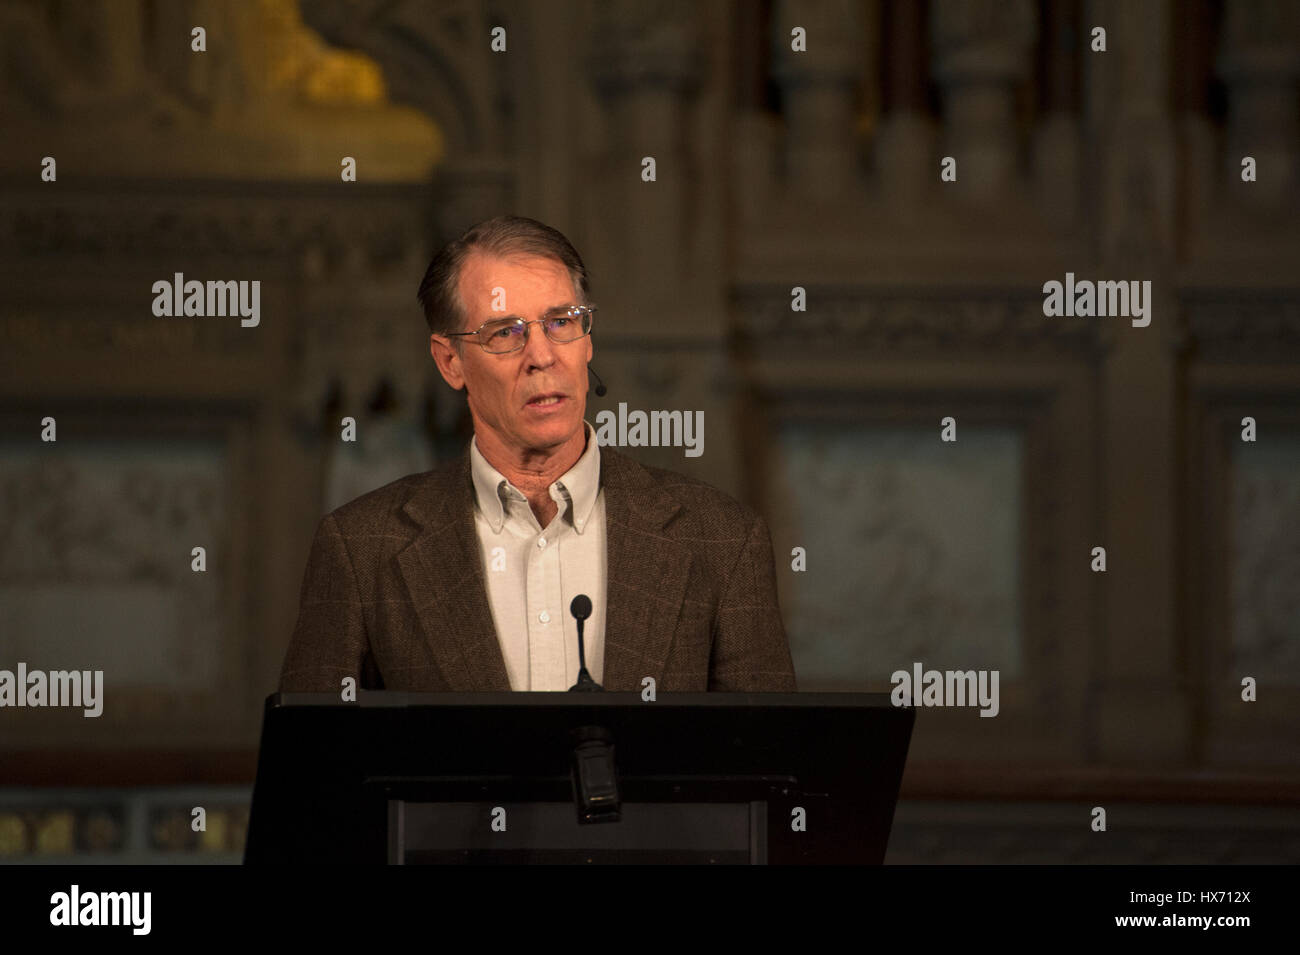 Kim Stanley Robinson, an award-winning writer of science fiction, talking at Trinity Church about his newest book, “New York 2140” during a conference Stock Photo